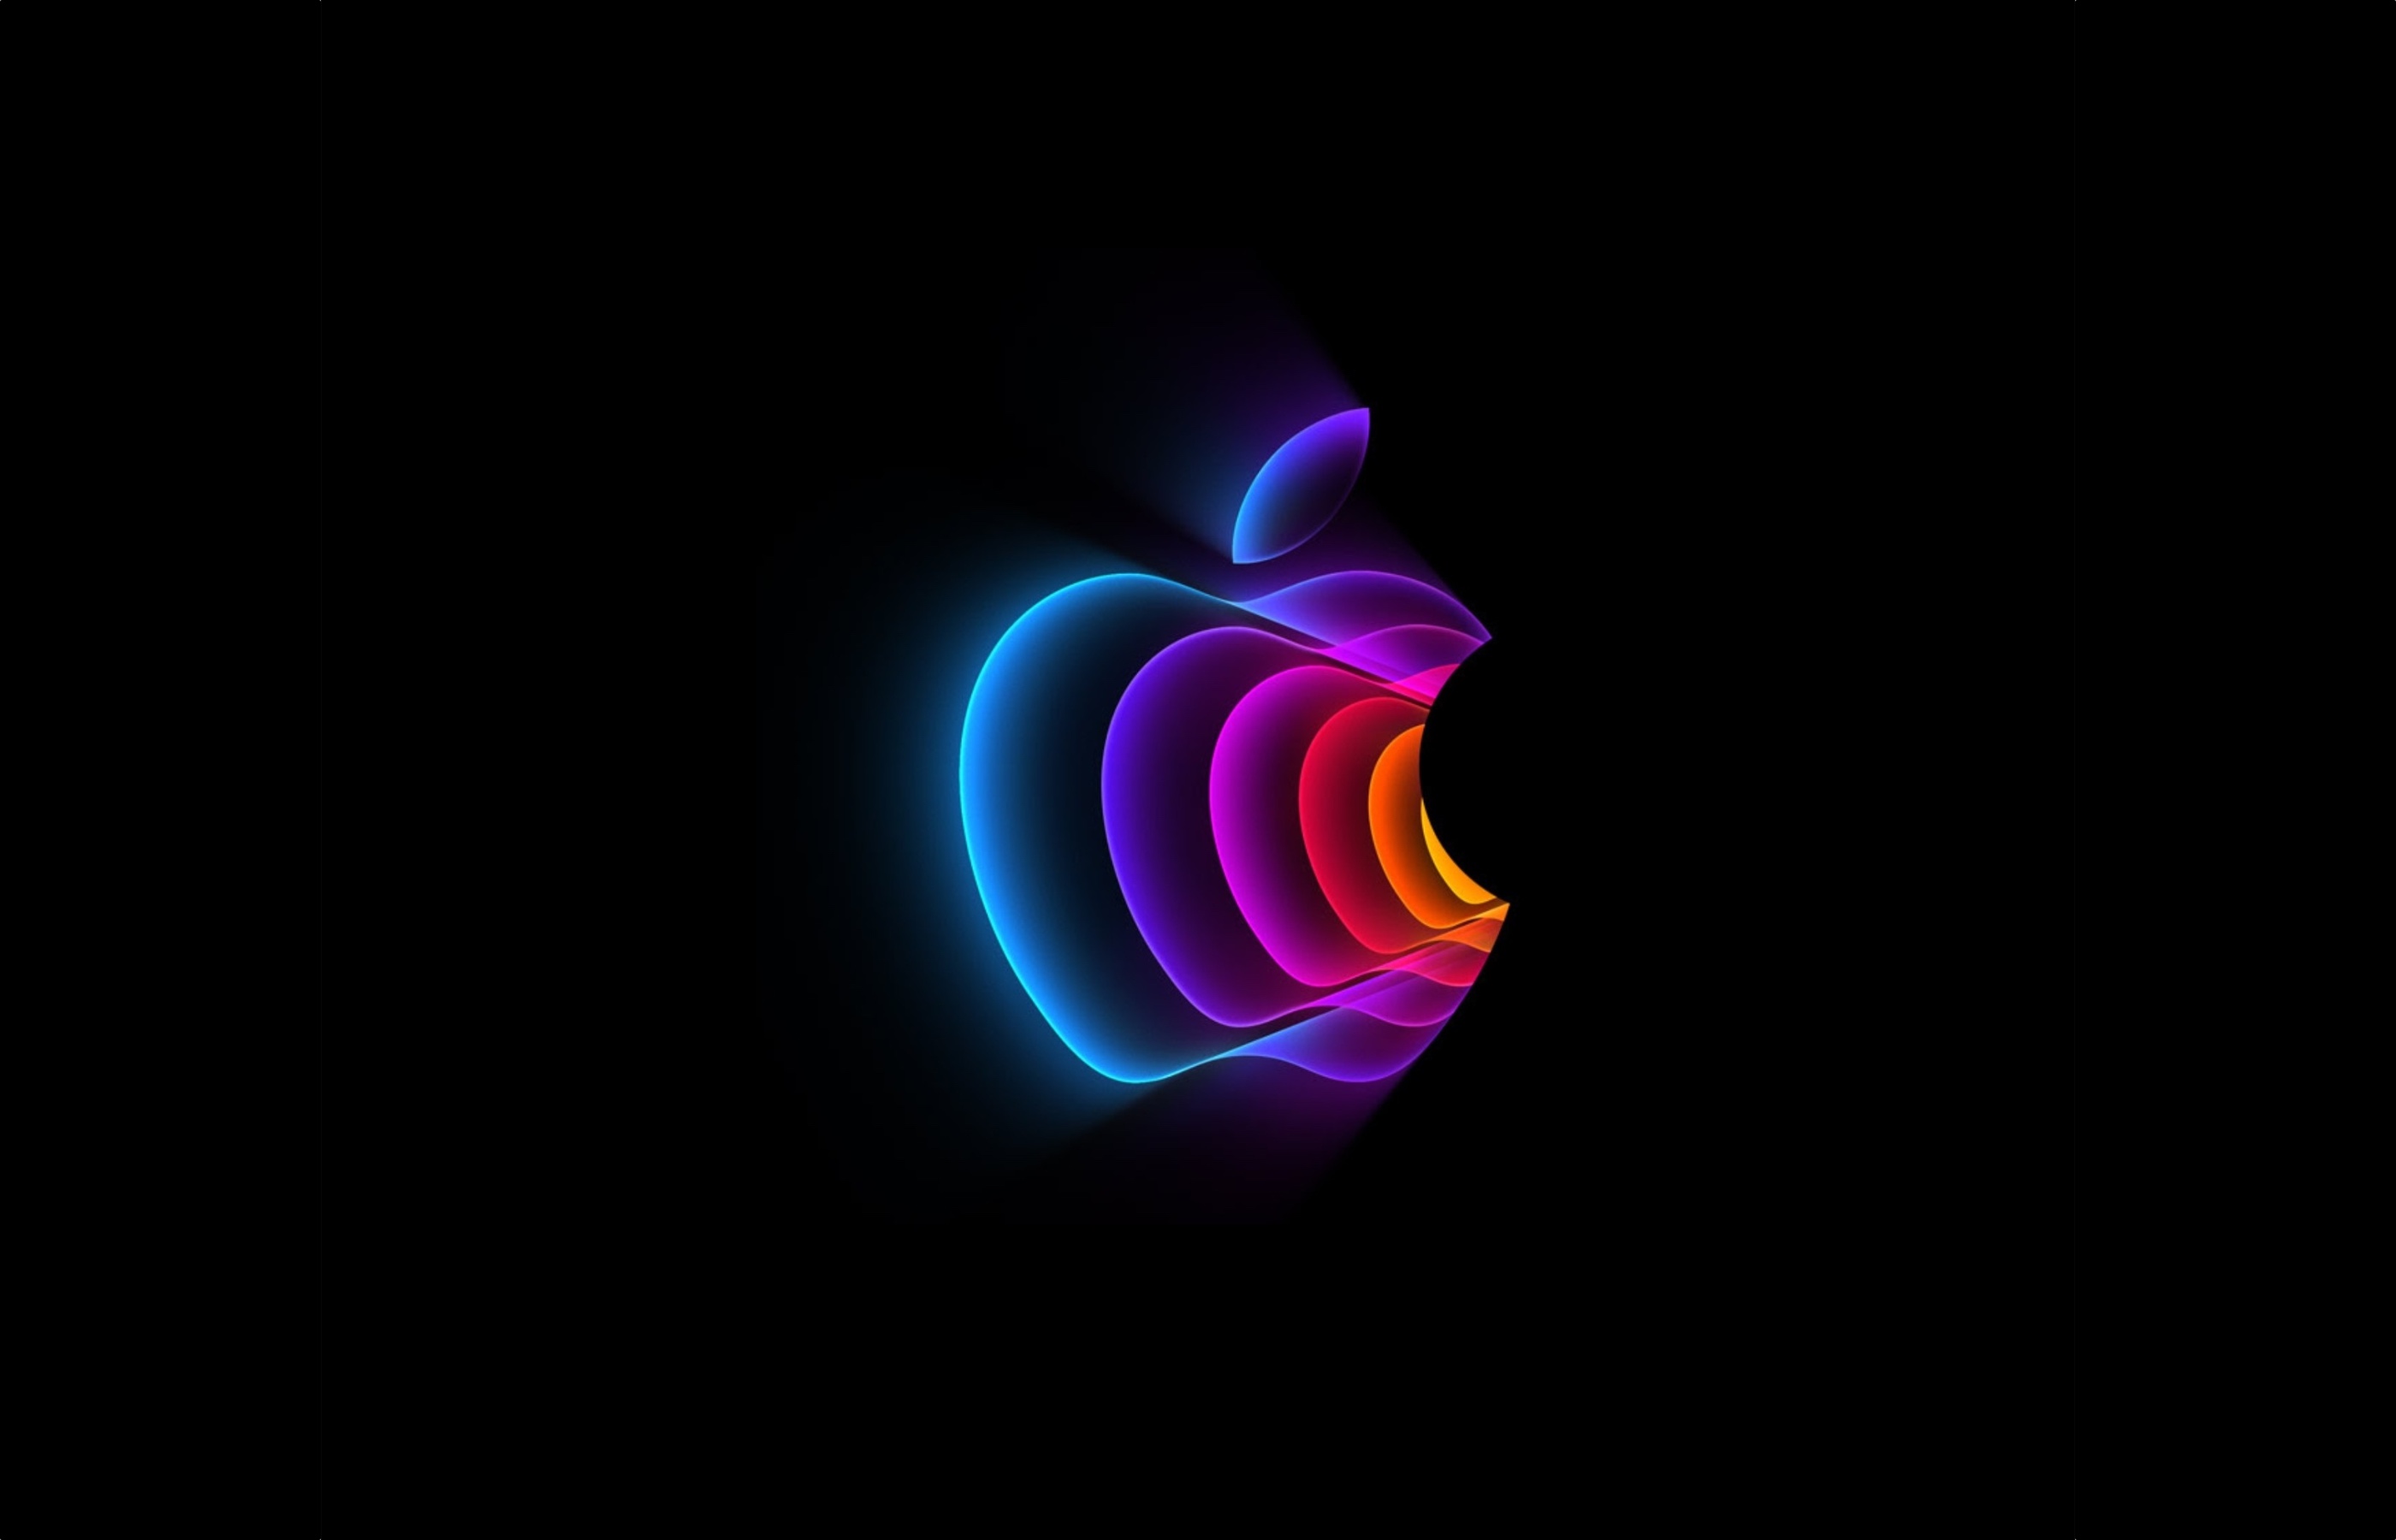 Peek Performance Wallpaper With Apple Logo For iPhone